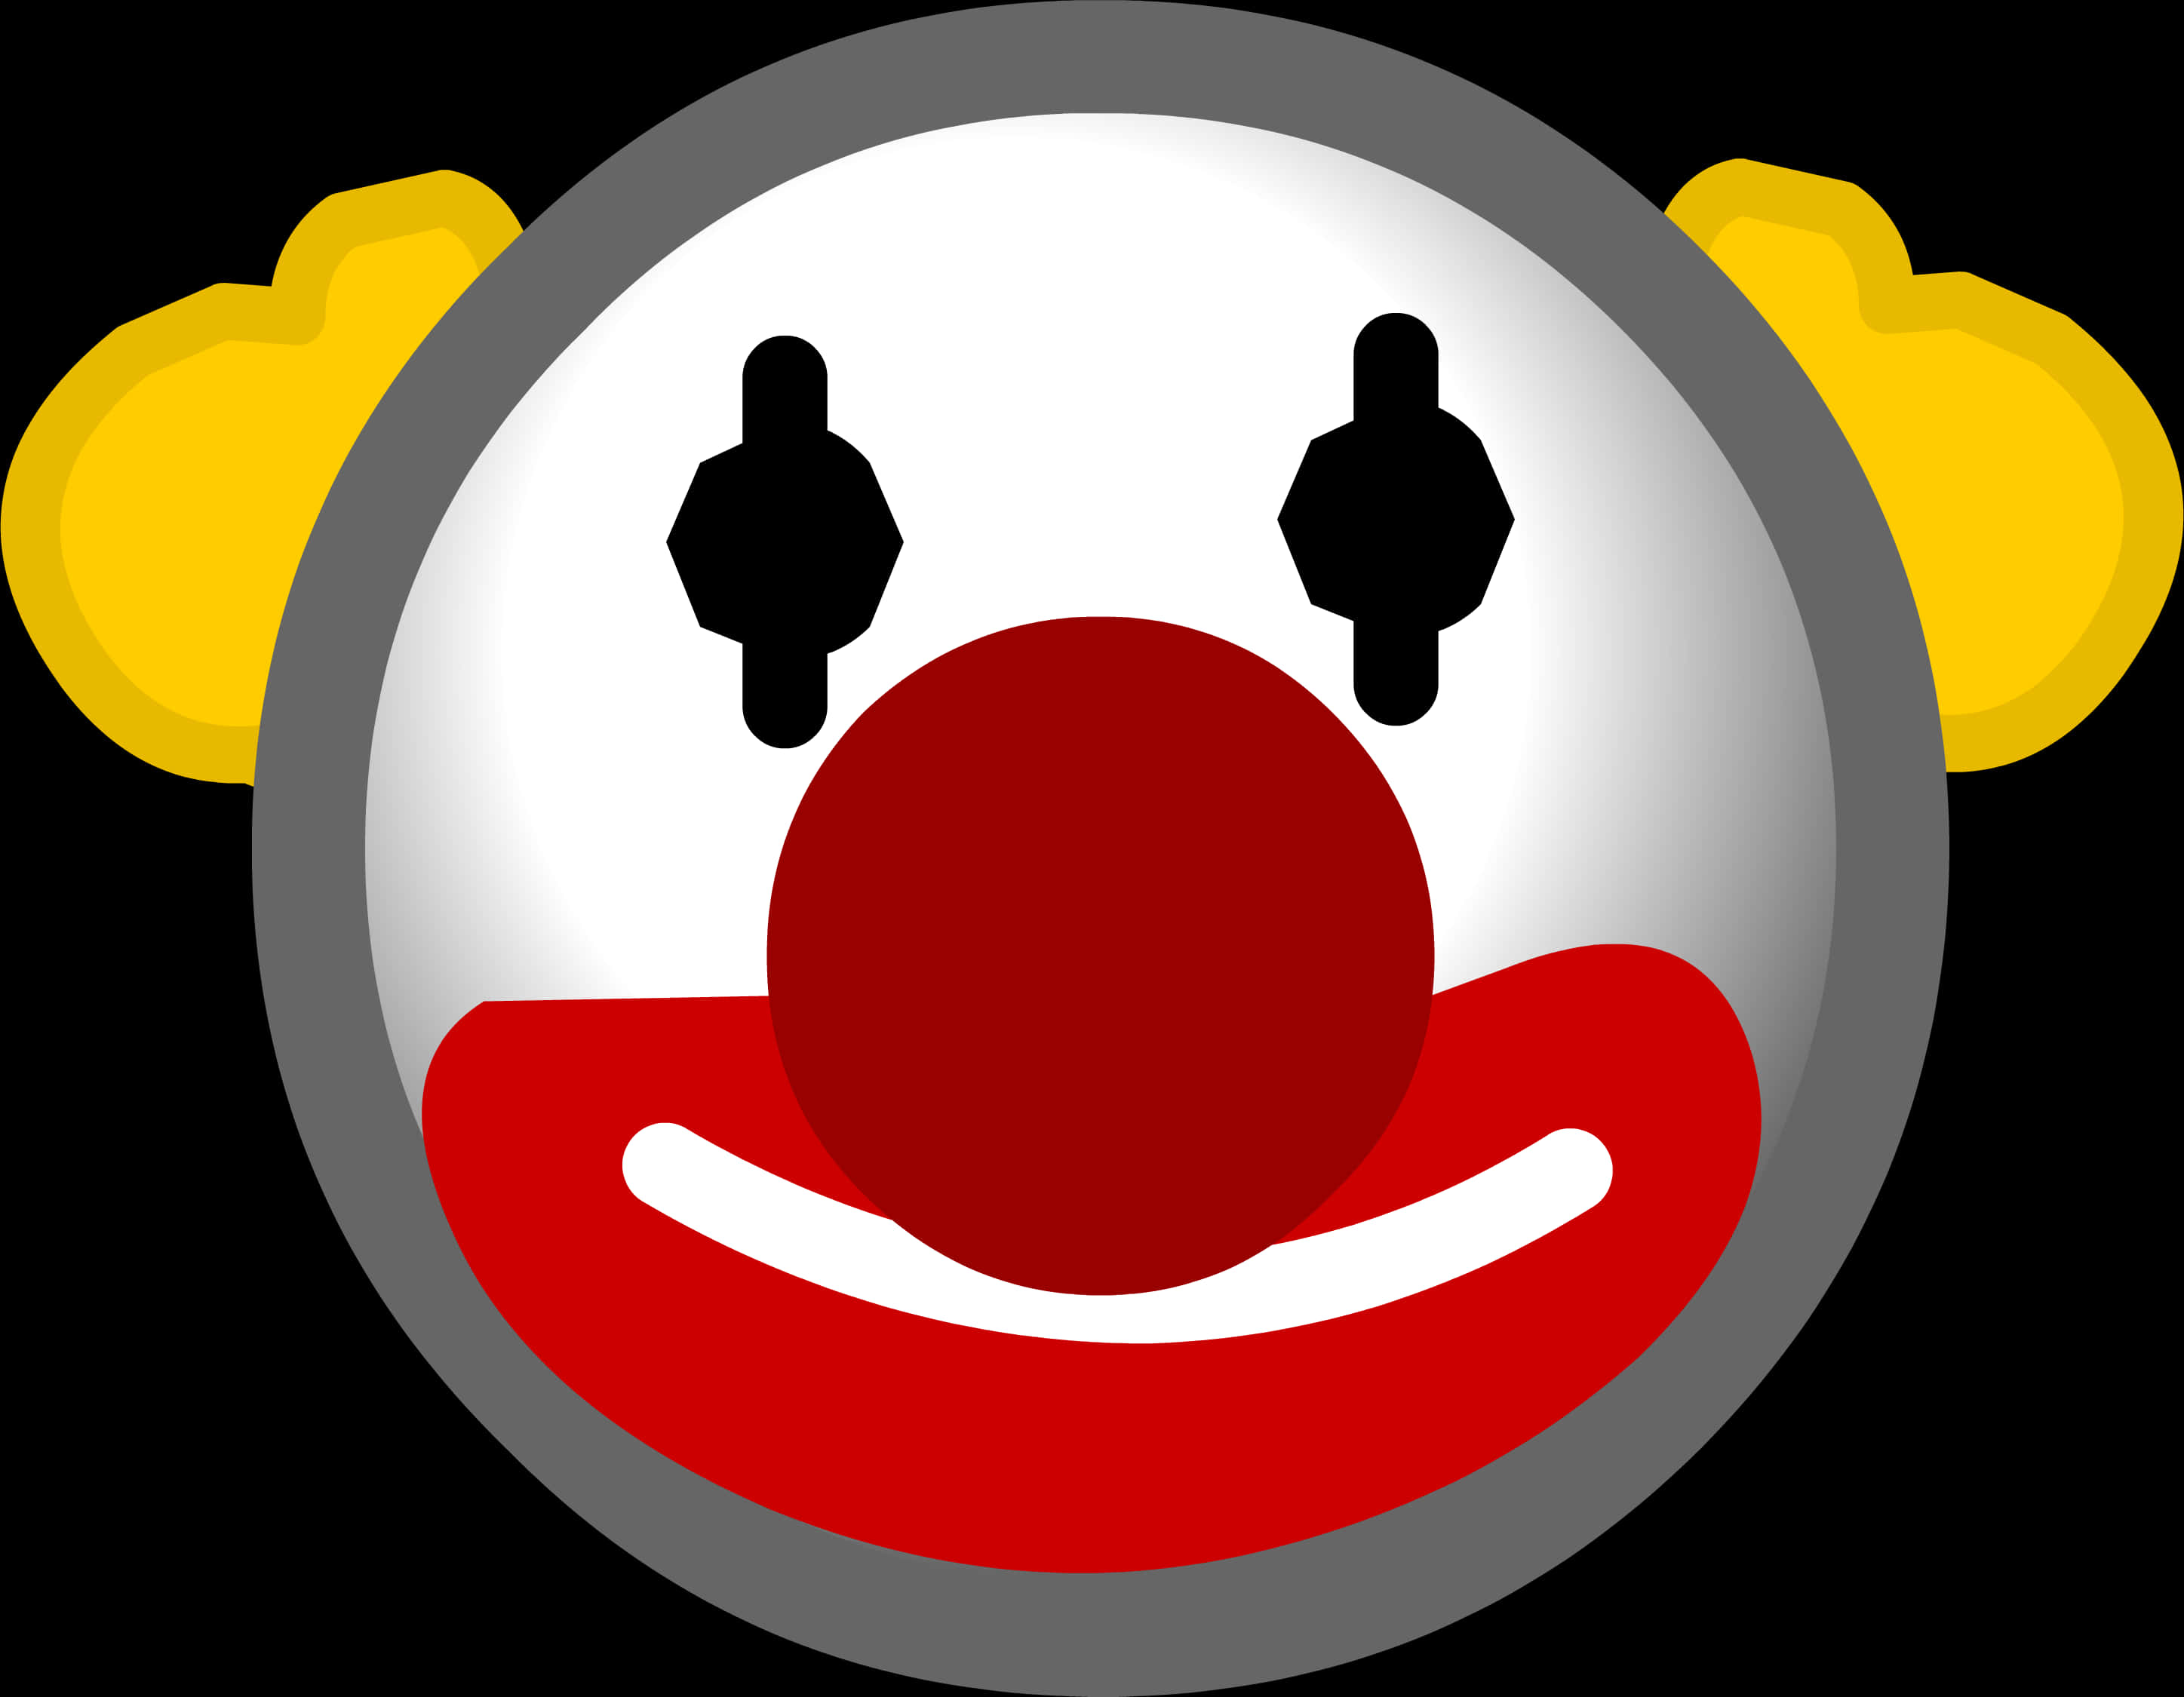 A Clown Face With Yellow Ears And Red Nose